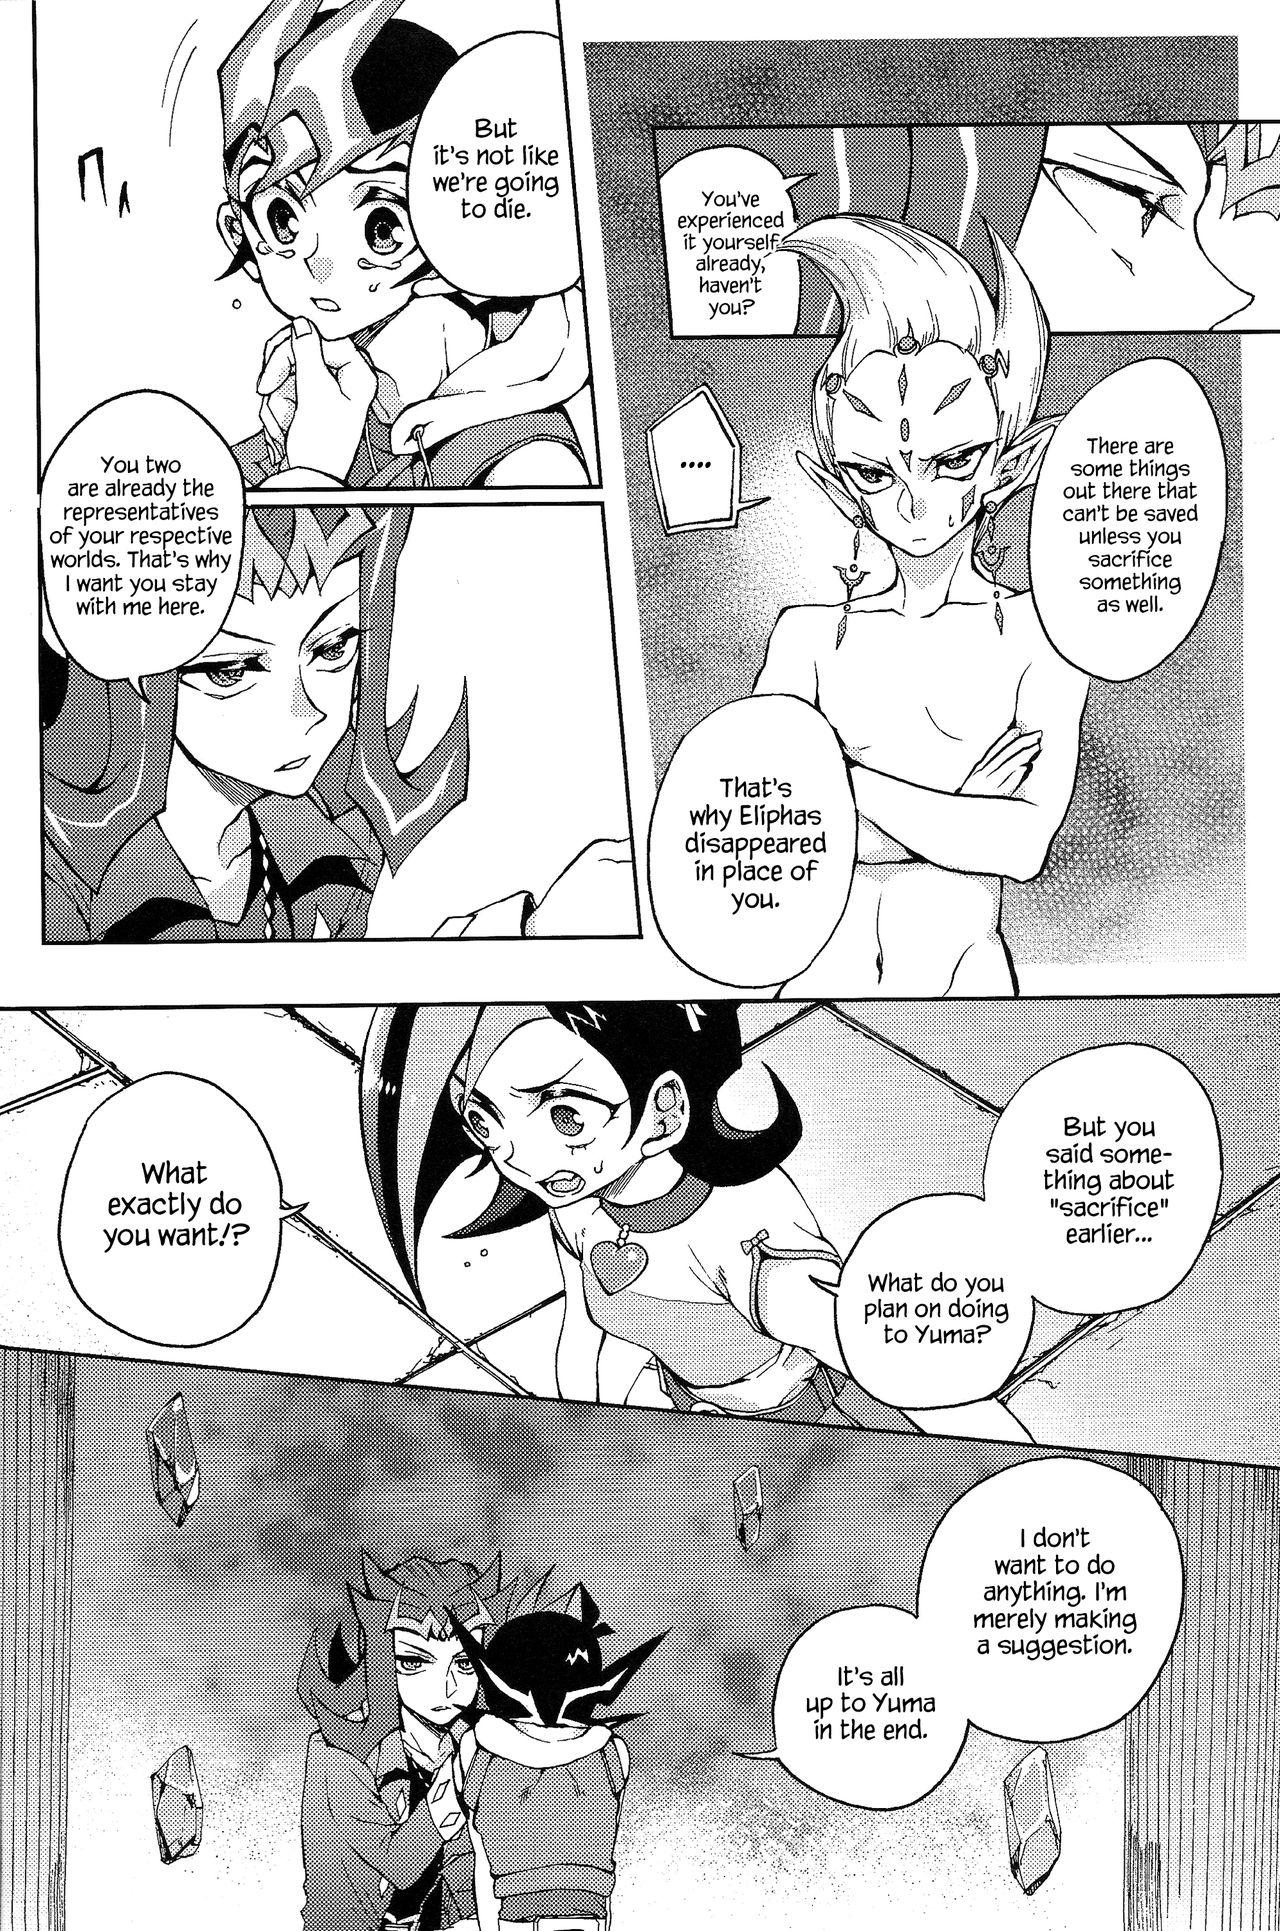 Class Room Ultimate Eden - Yu-gi-oh zexal Rola - Page 11